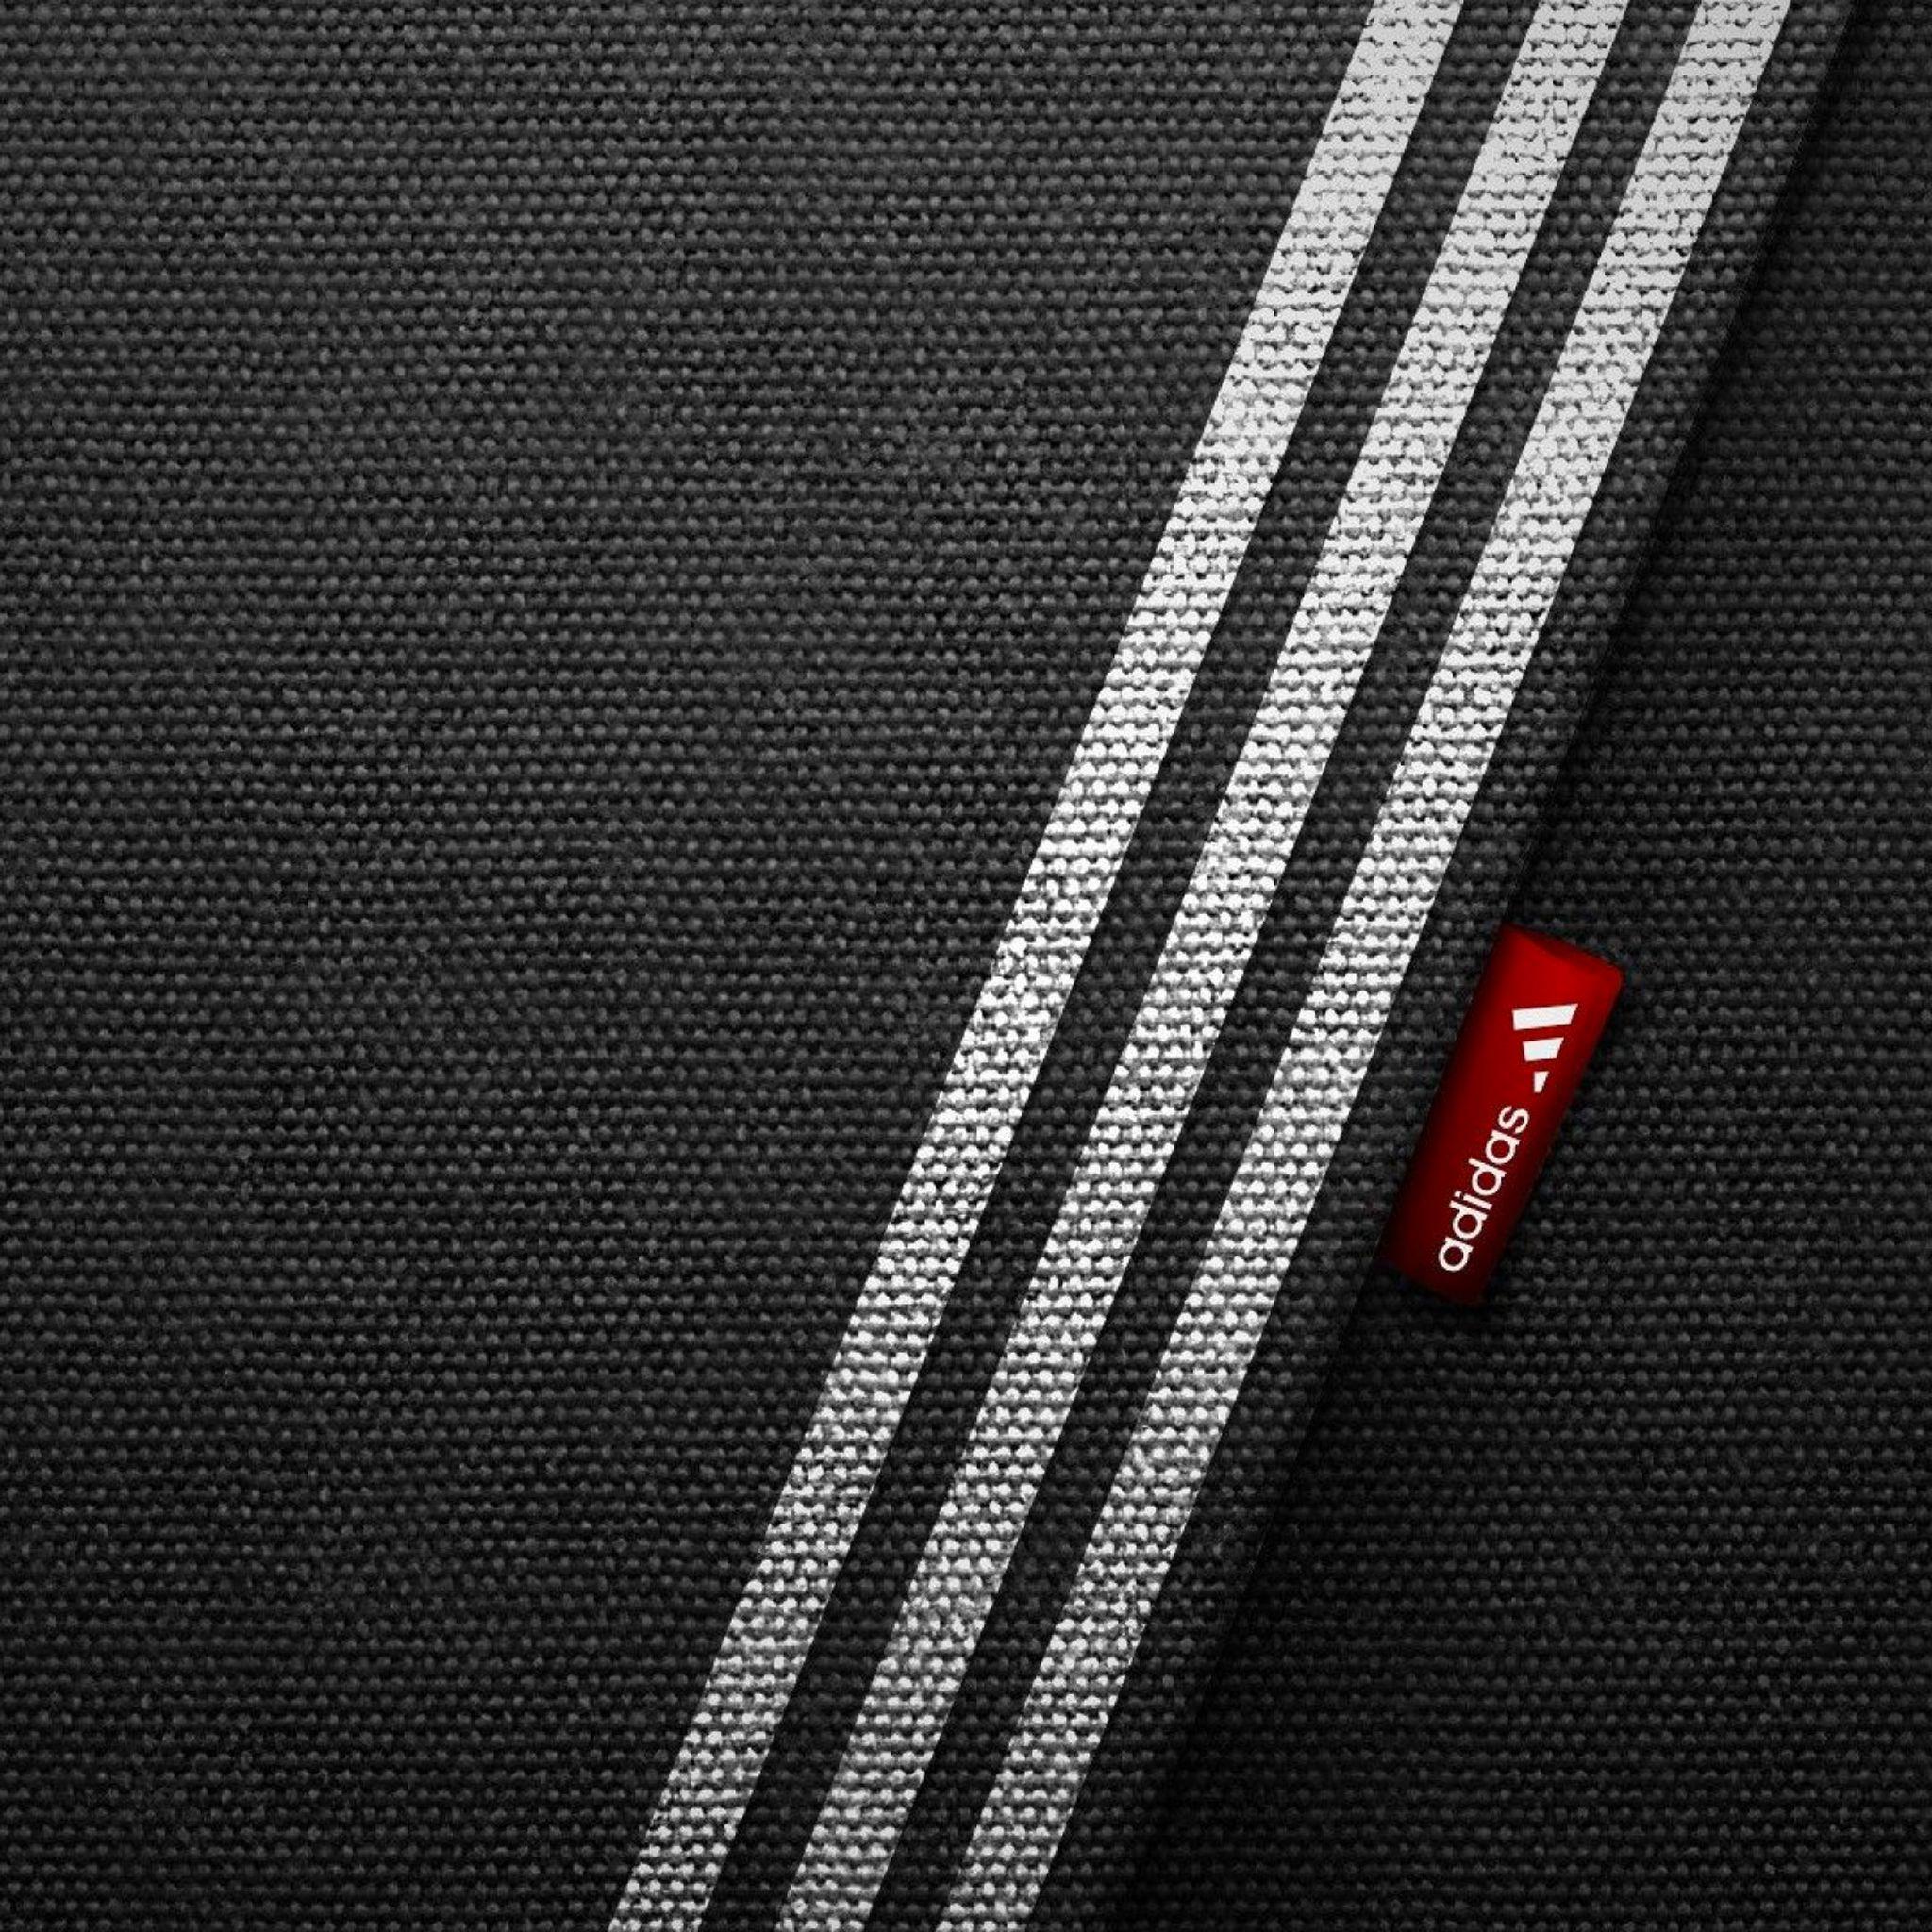 Adidas Brand Wallpaper for iPhone X, 6 Download